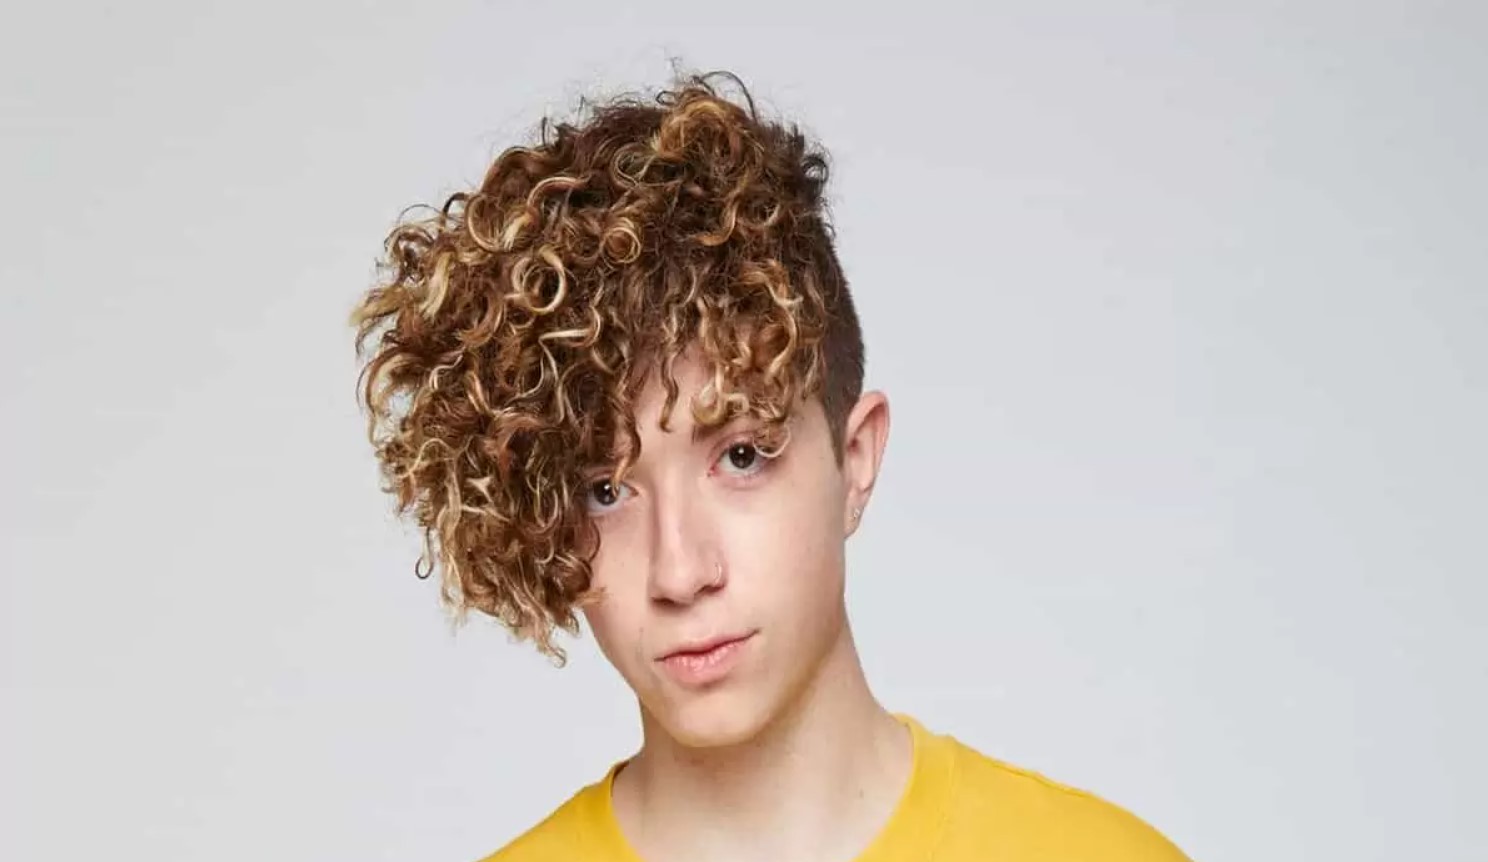 Jack Avery picture